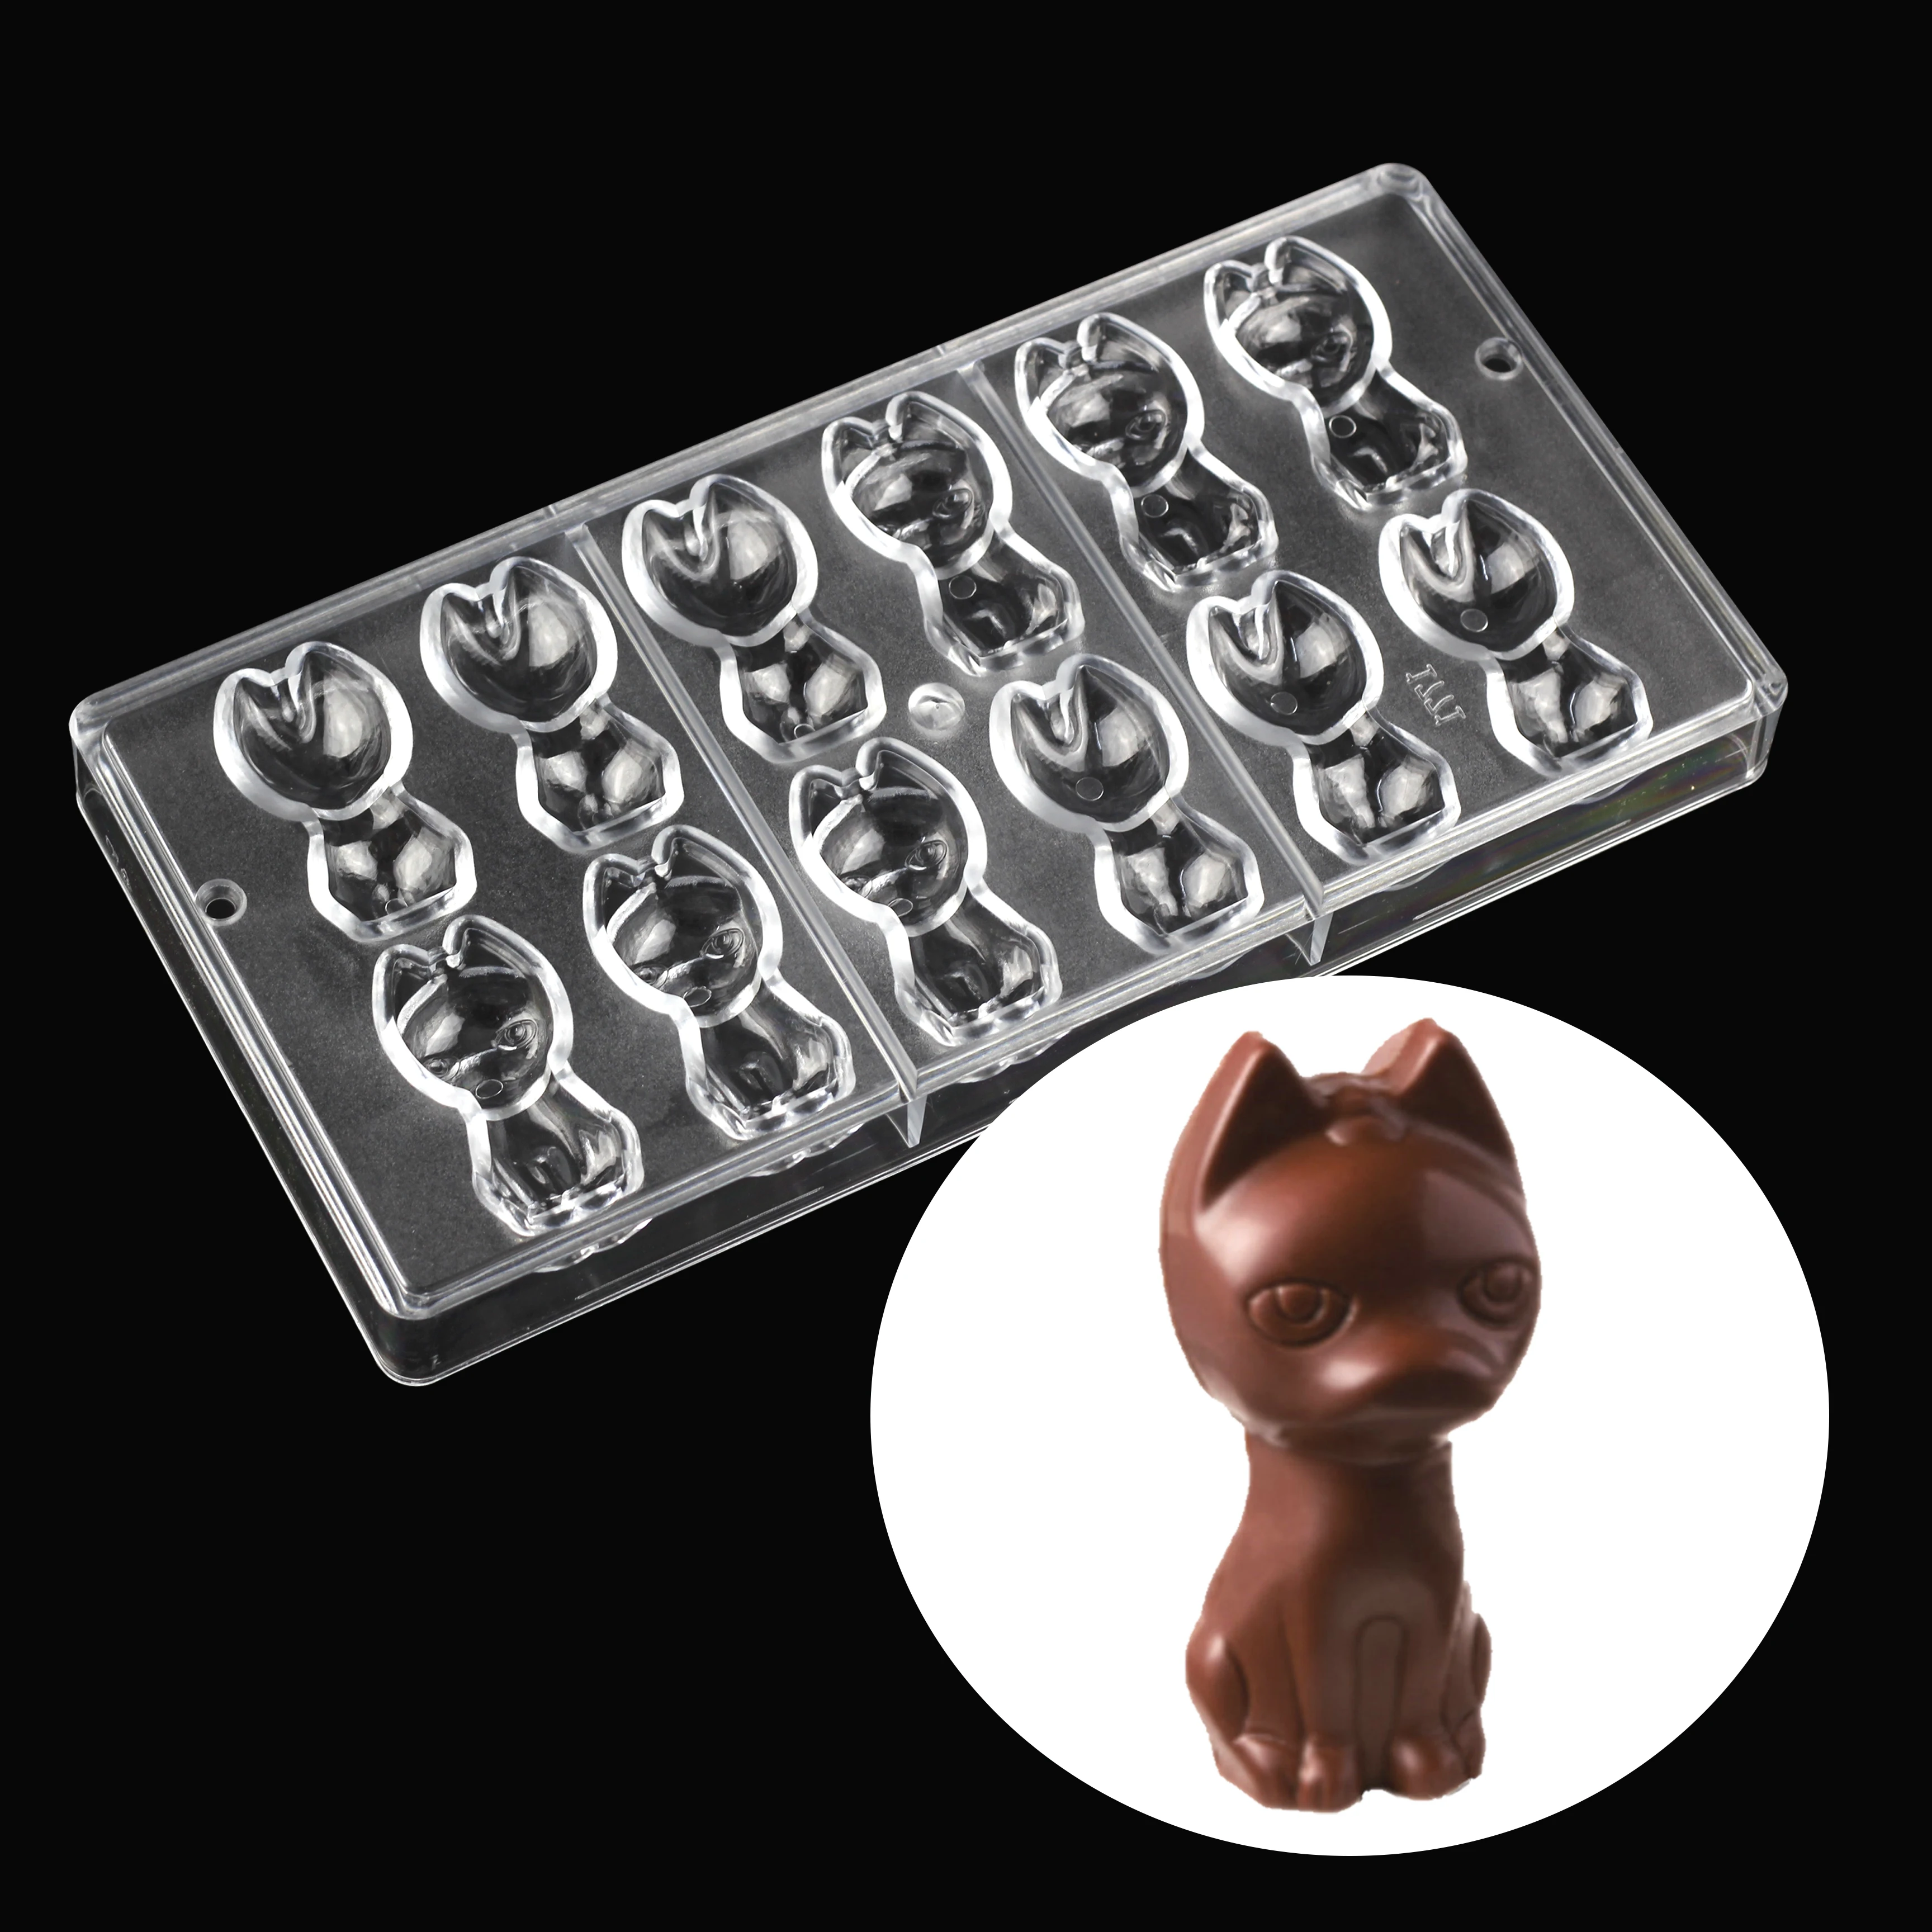 

Bakeware Cat Shape Polycarbonate Chocolate Mold Creative Candy Pastry Confectionery Tools Baking Mold For Cake Decorating Tools